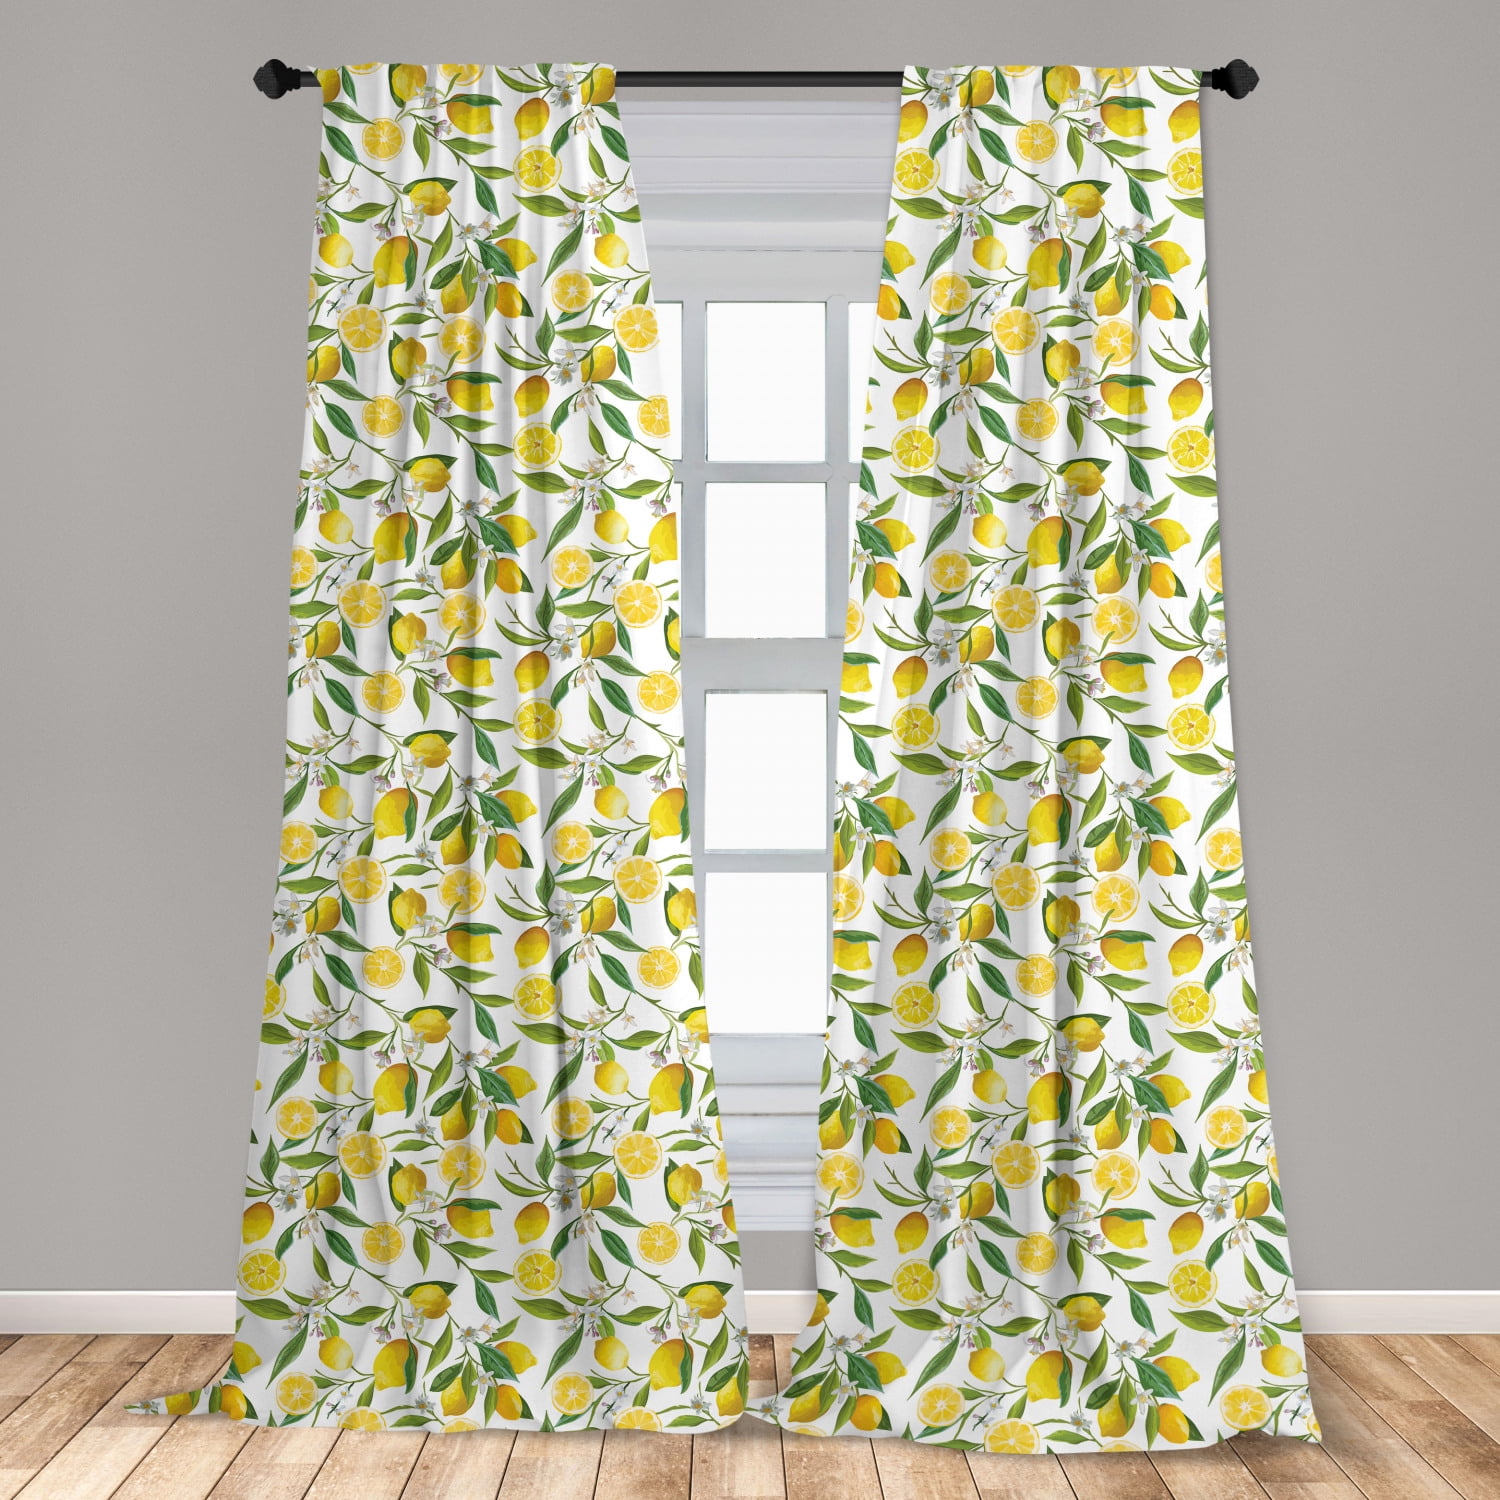 2 Panels Window Curtain Drapes 3D Effect Pattern for Living Room Bedroom G 